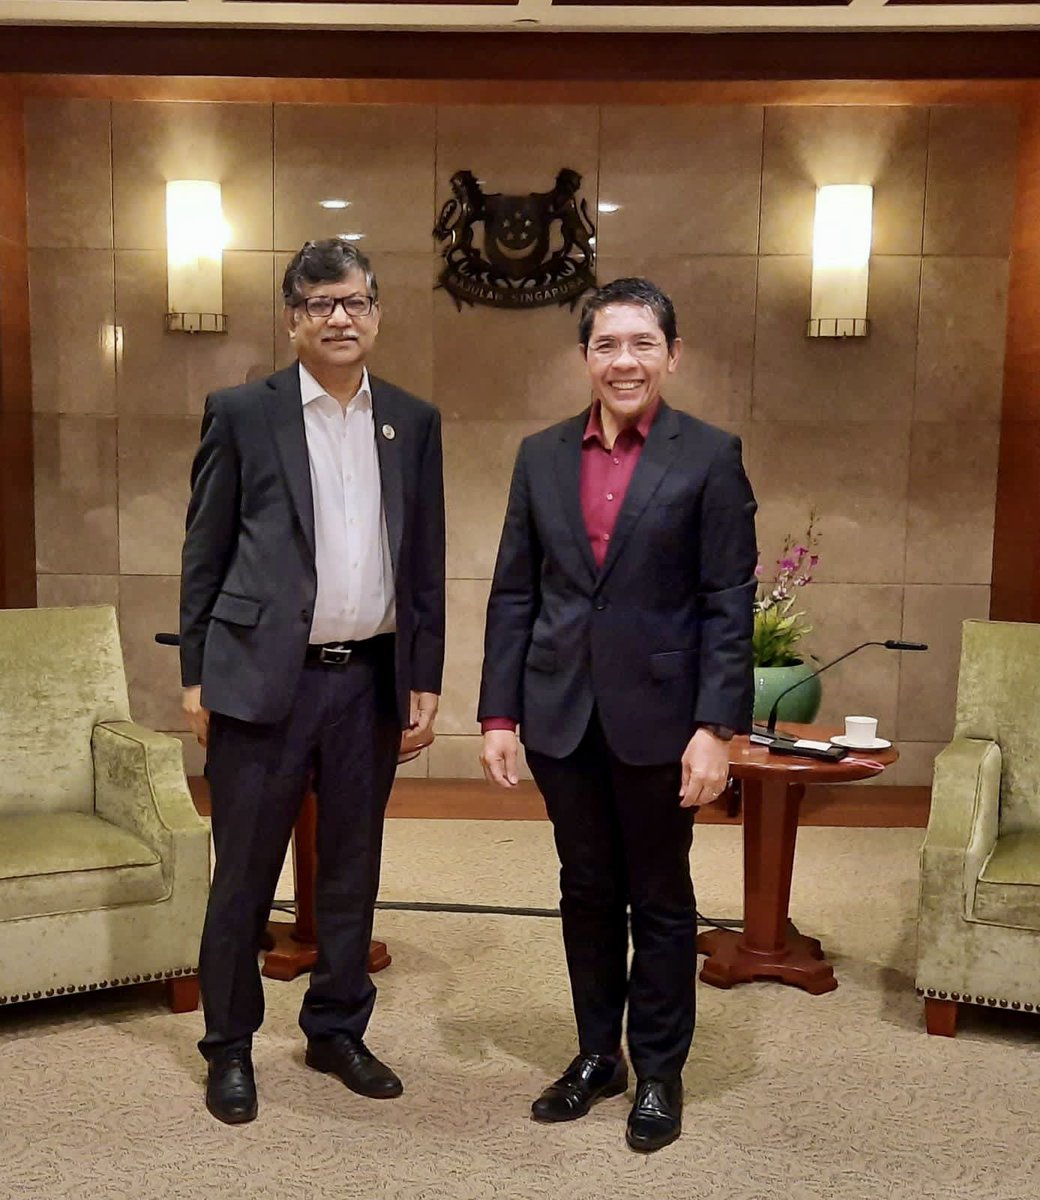 Honored to meet H.E. Maliki bin Osman, the Hon'ble Minister for Prime Minister's Office and Second Minister for Foreign Affairs of Singapore this afternoon. Discussed wide range of issues of mutual interest between our two friendly countries.